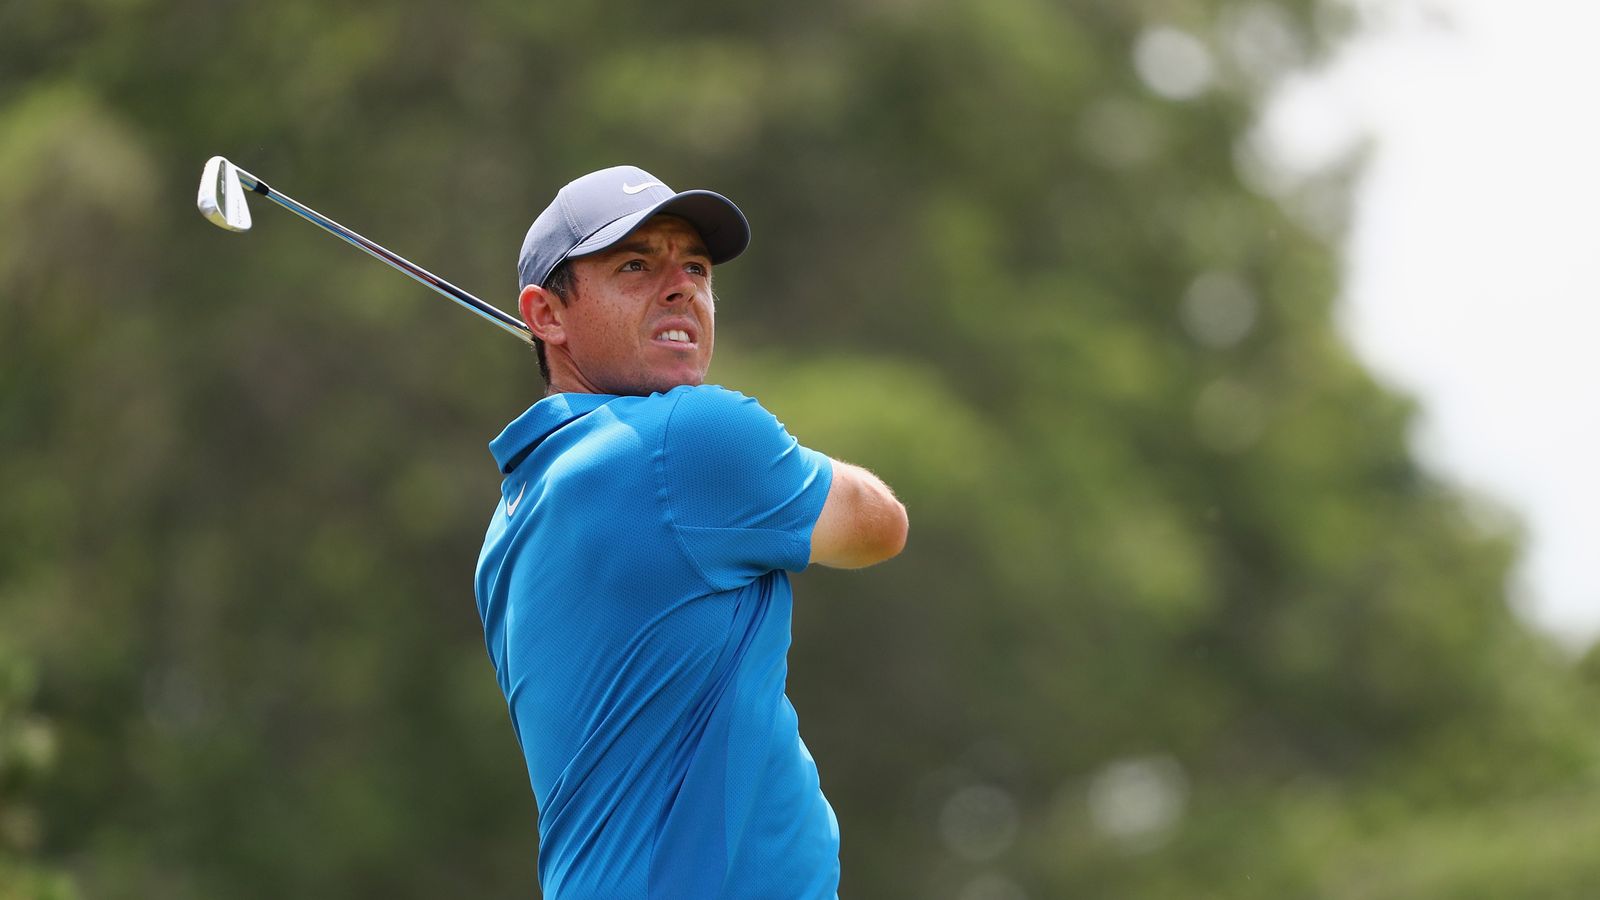 Rory McIlroy still has work to do on his game ahead of The Open | Golf ...